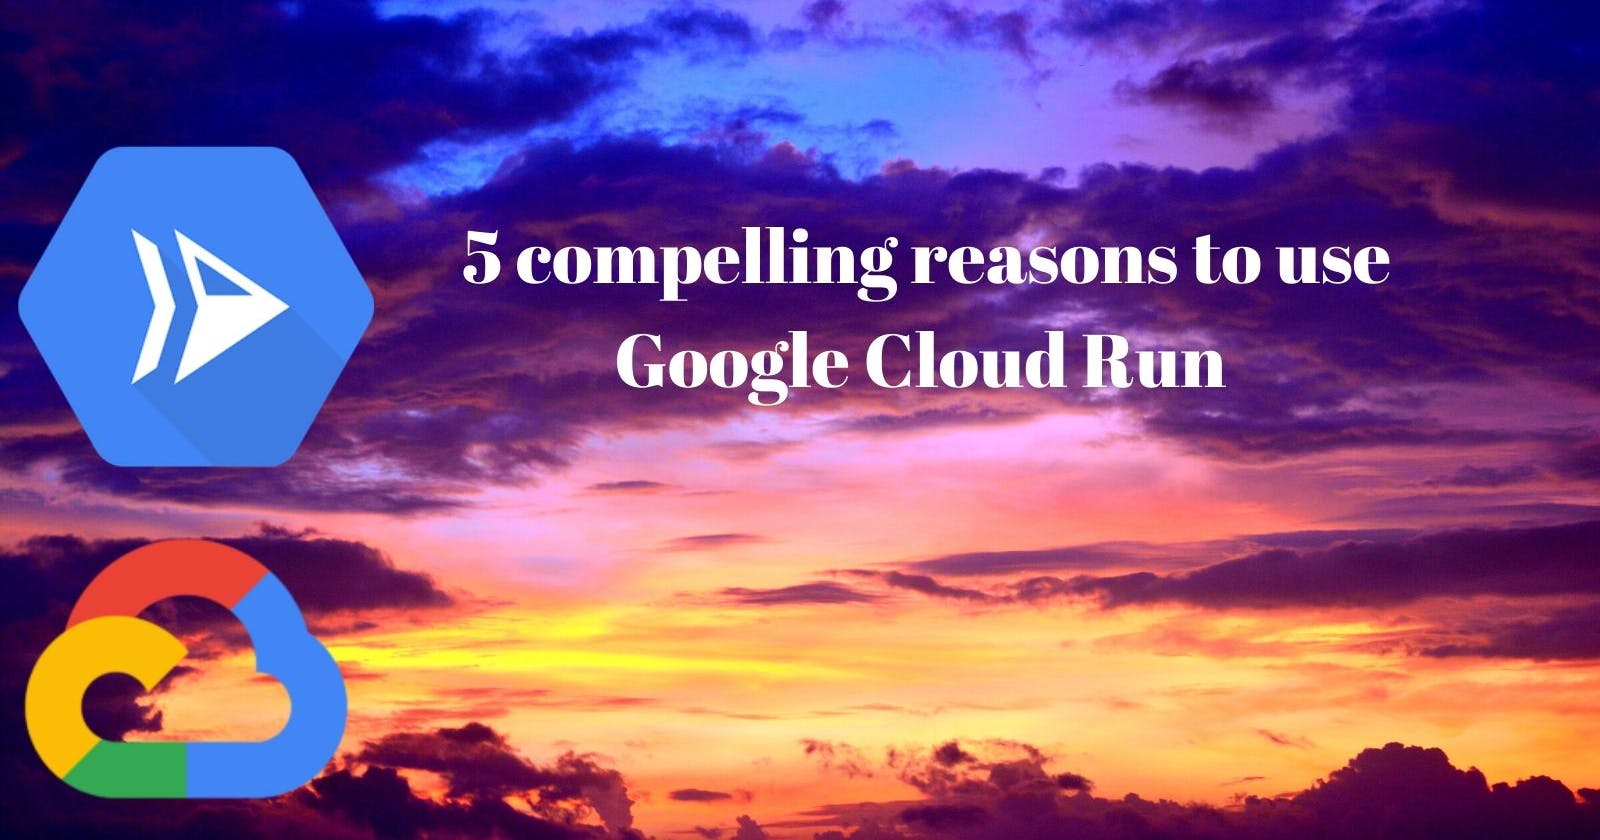 Why use Google Cloud Run? Here are 5 compelling reasons to opt for serverless containers